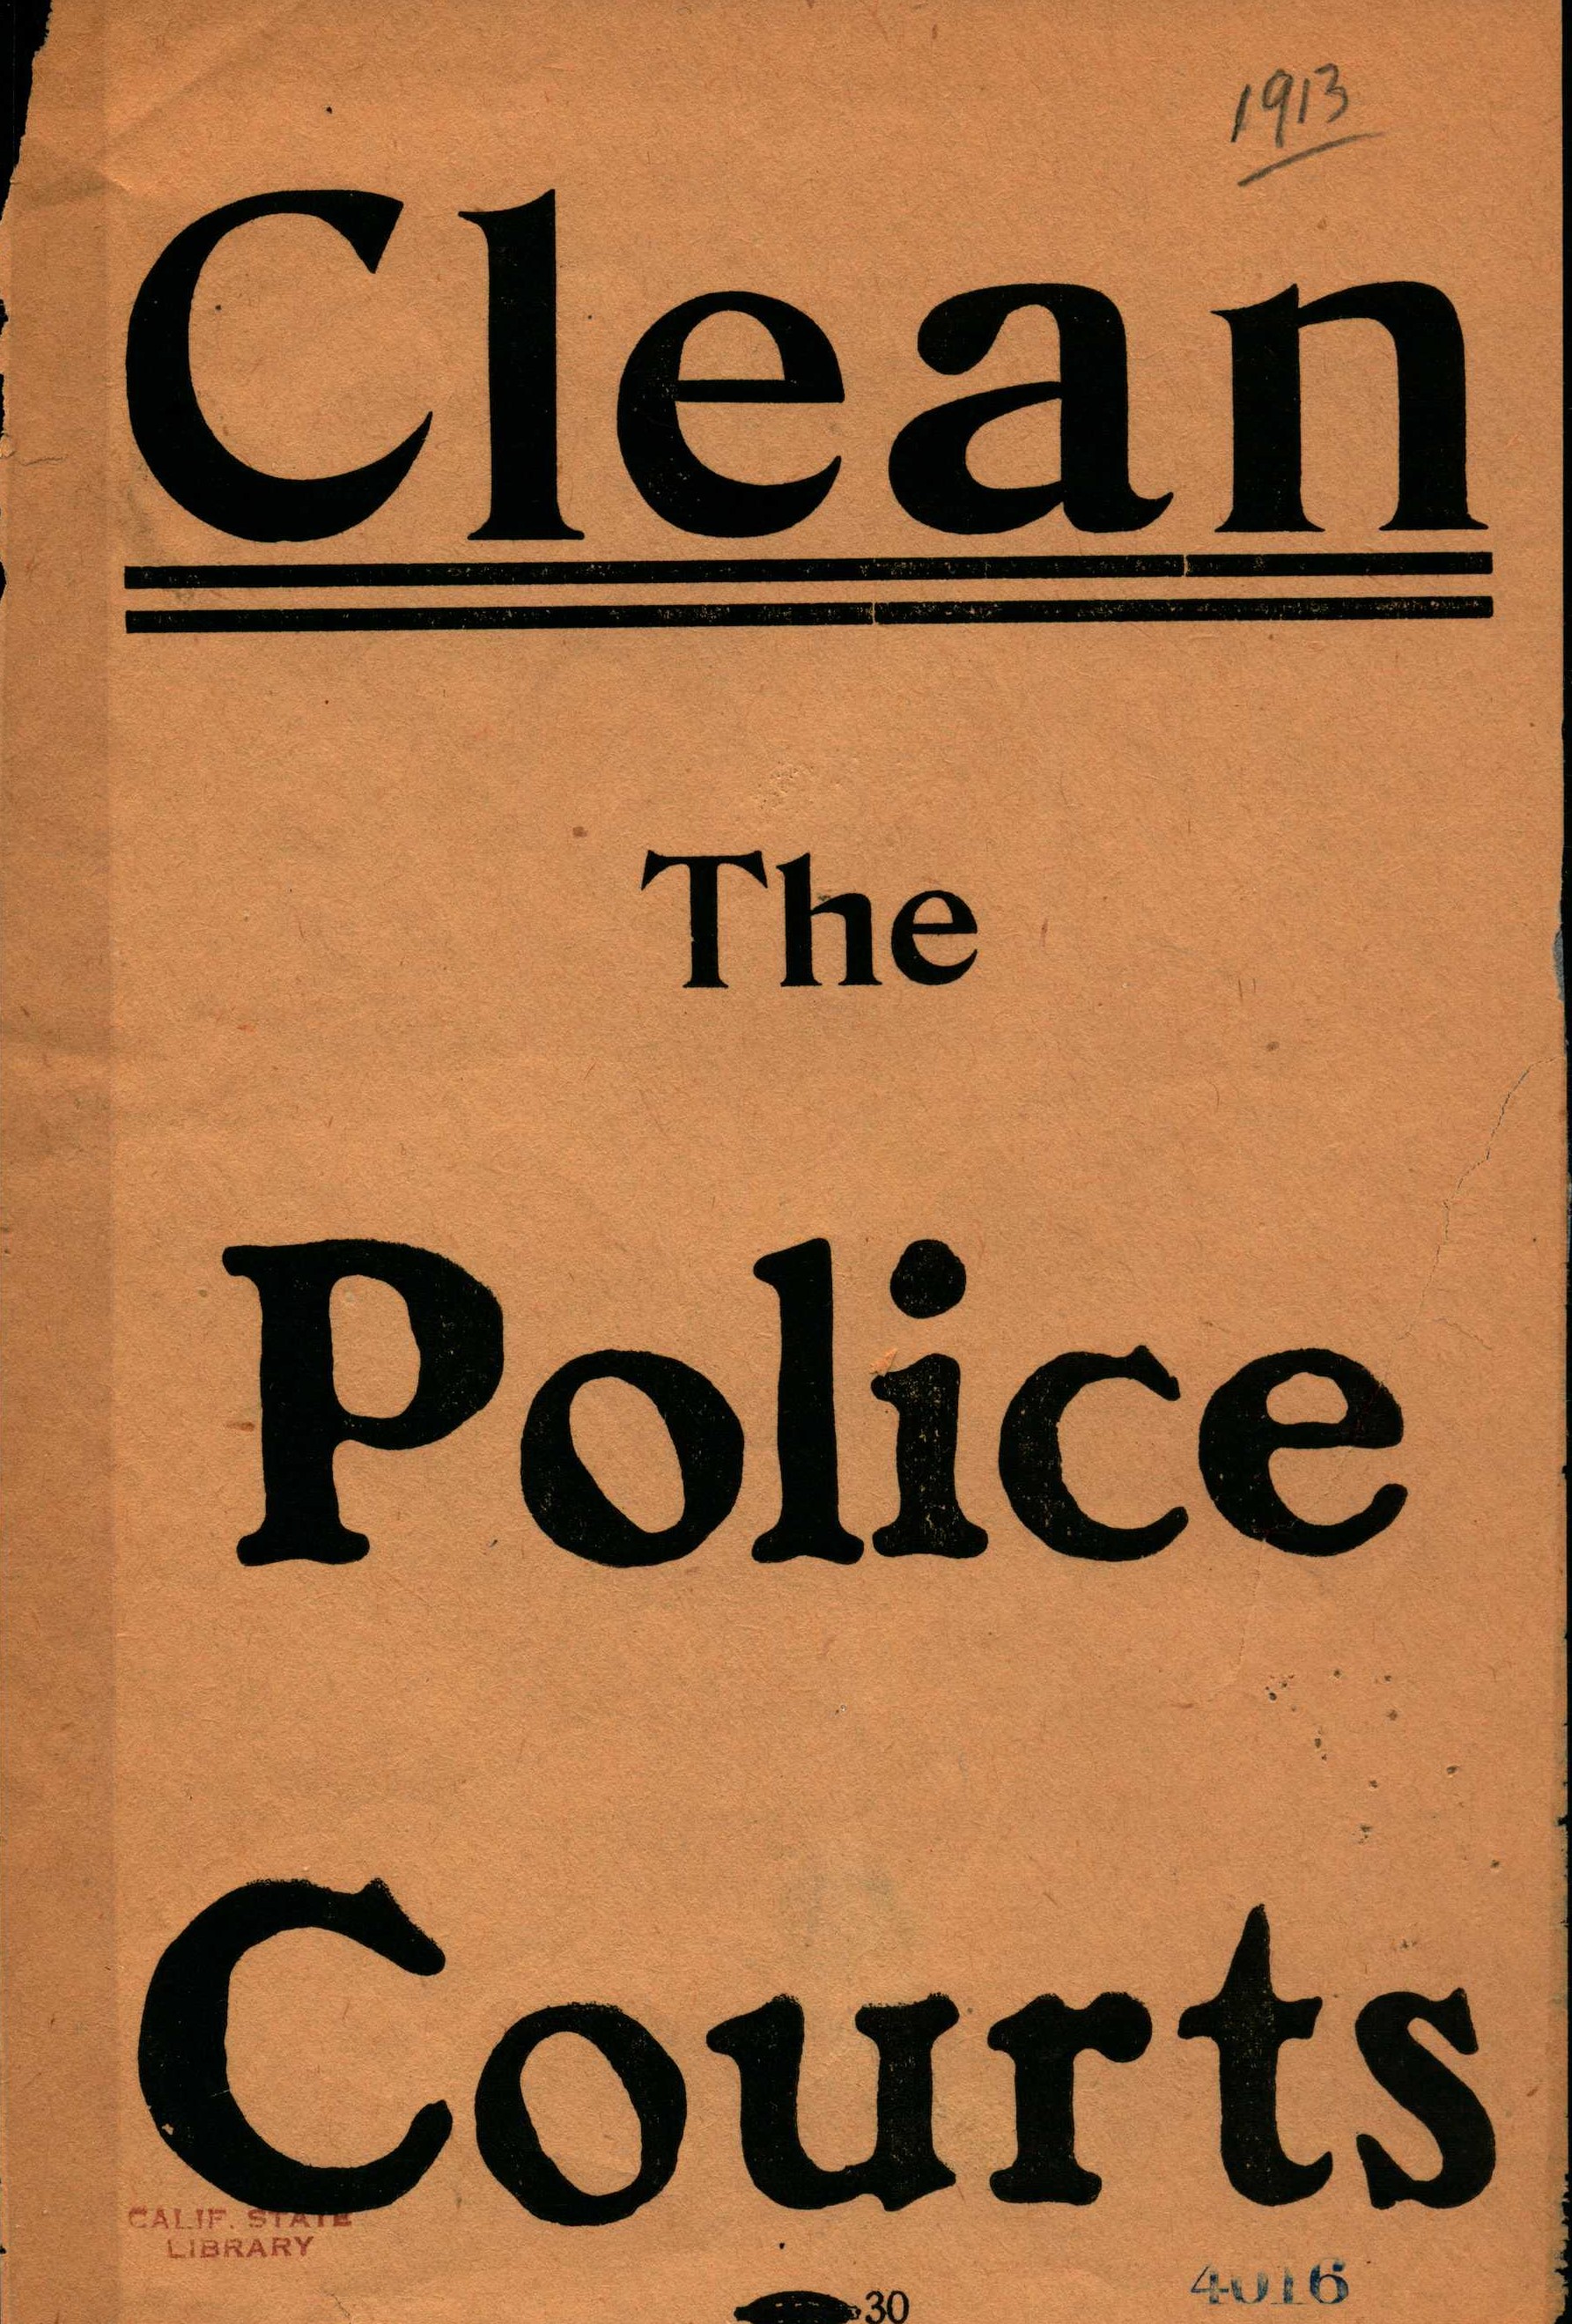 Broadside dated 1913 reading 'Clean the Police Courts'